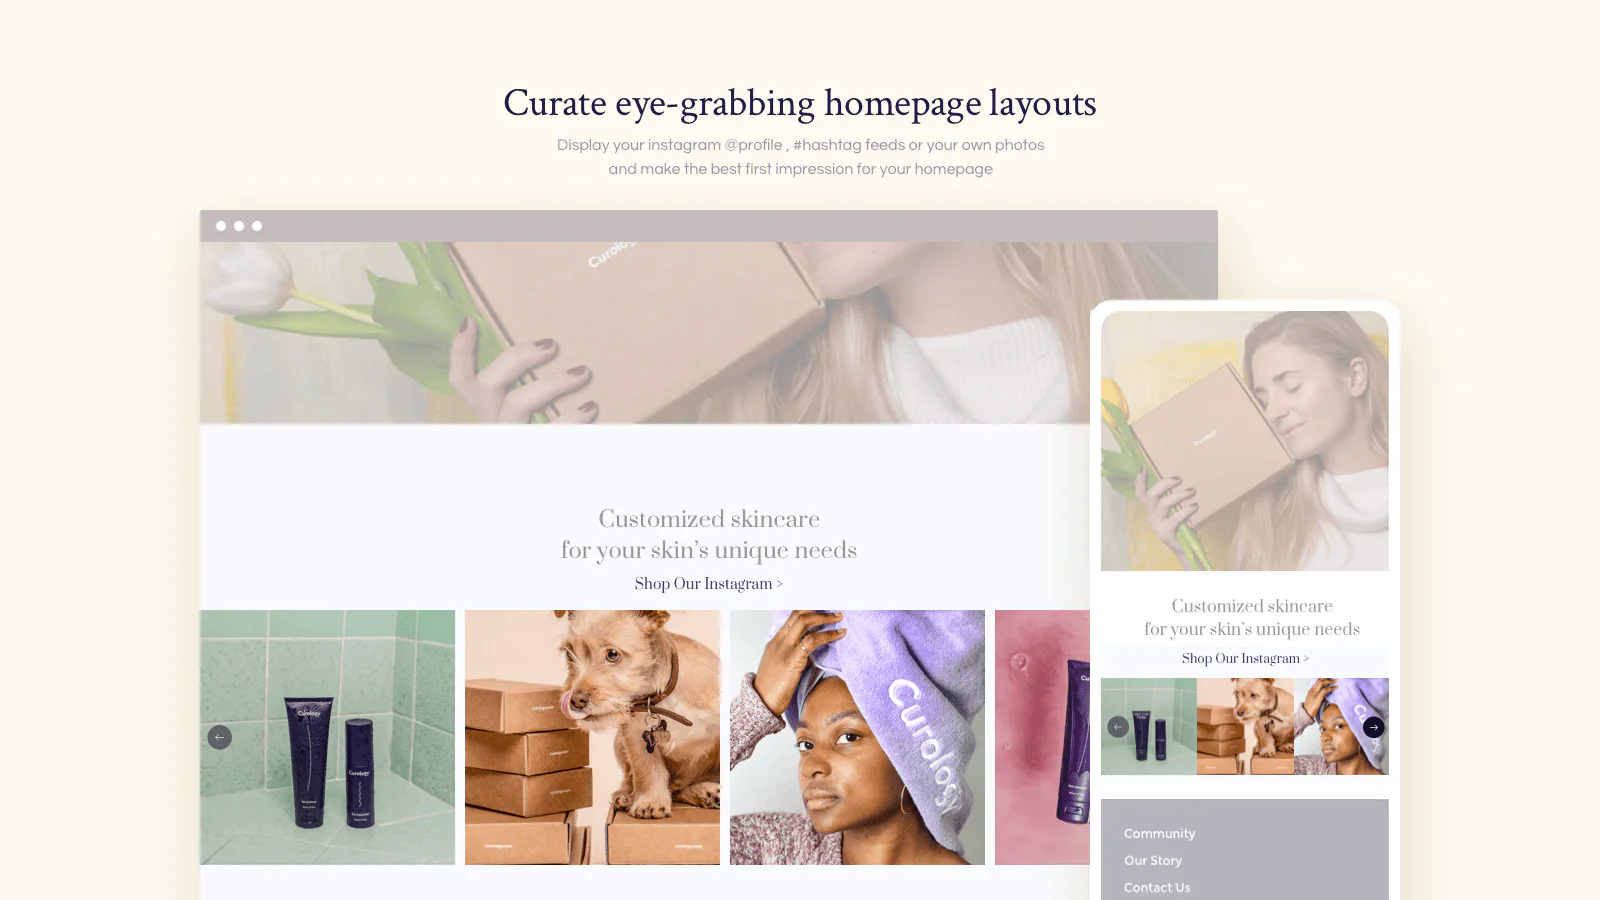 covet-instagram-feed-and-reviews-homepage-layout